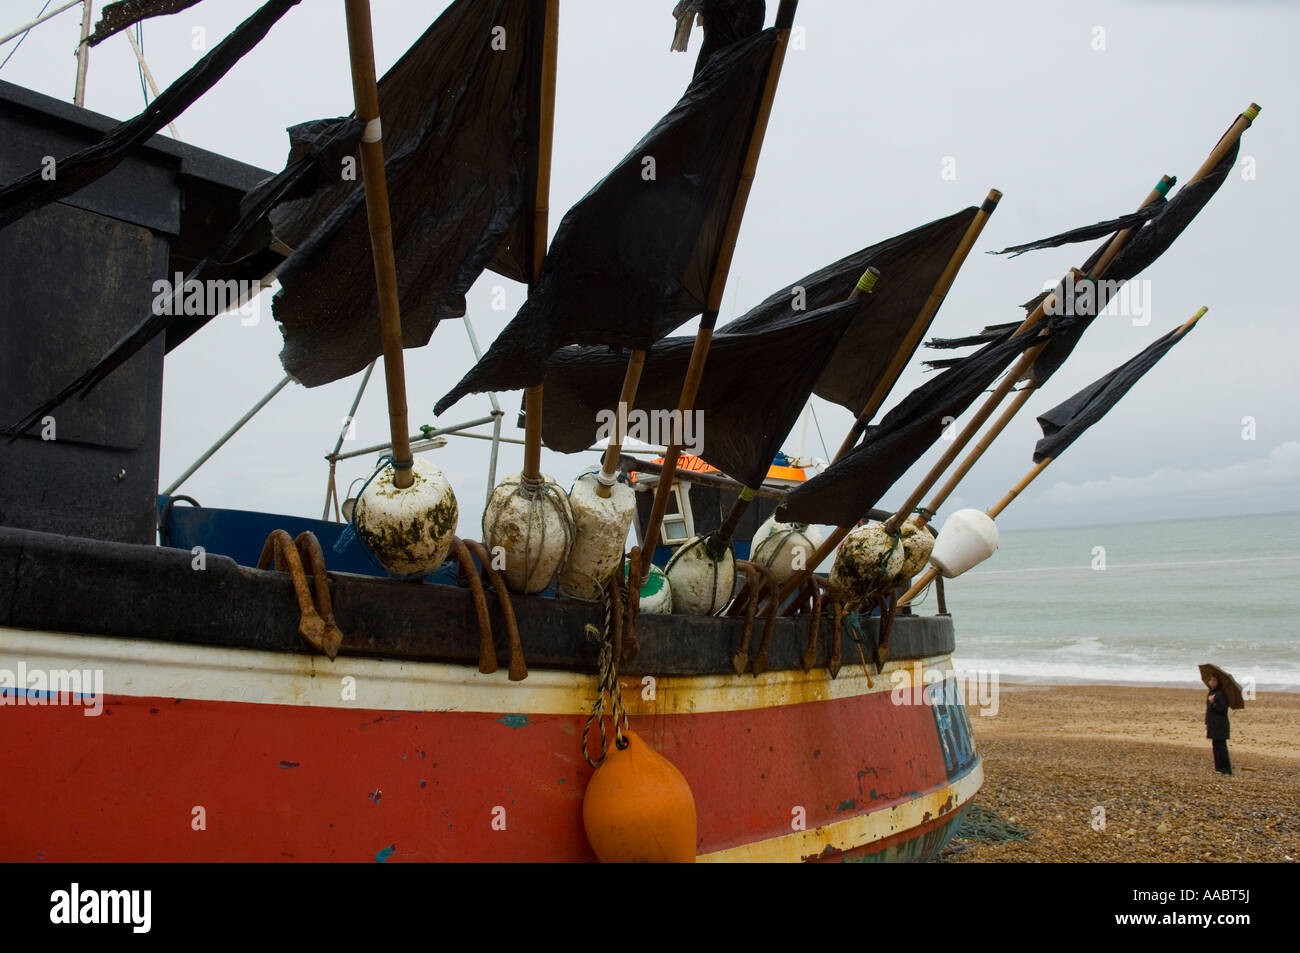 Fishing boat with black flags on the beach on a rainy day